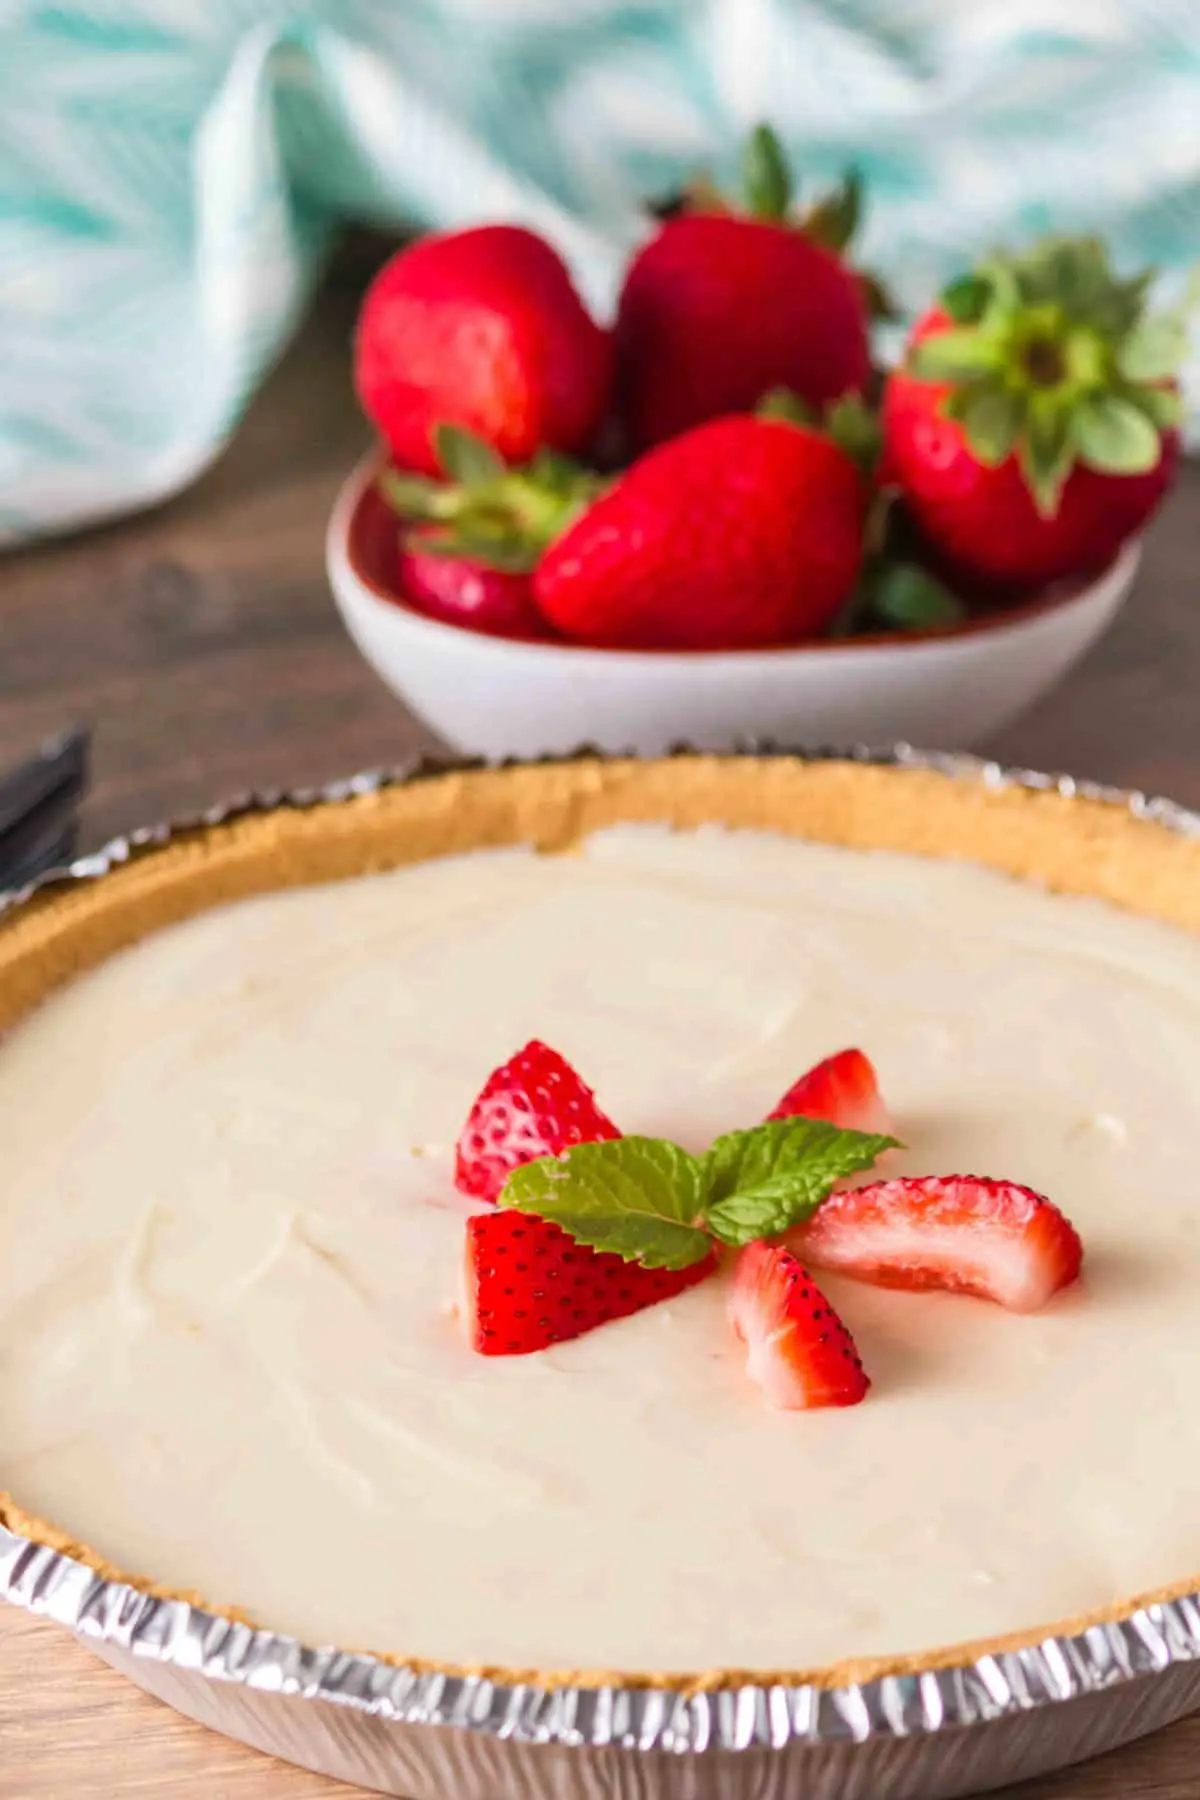 3 Ingredient Cheesecake is an easy no bake dessert recipe made with a graham pie crust, cream cheese and sweetened condensed milk.